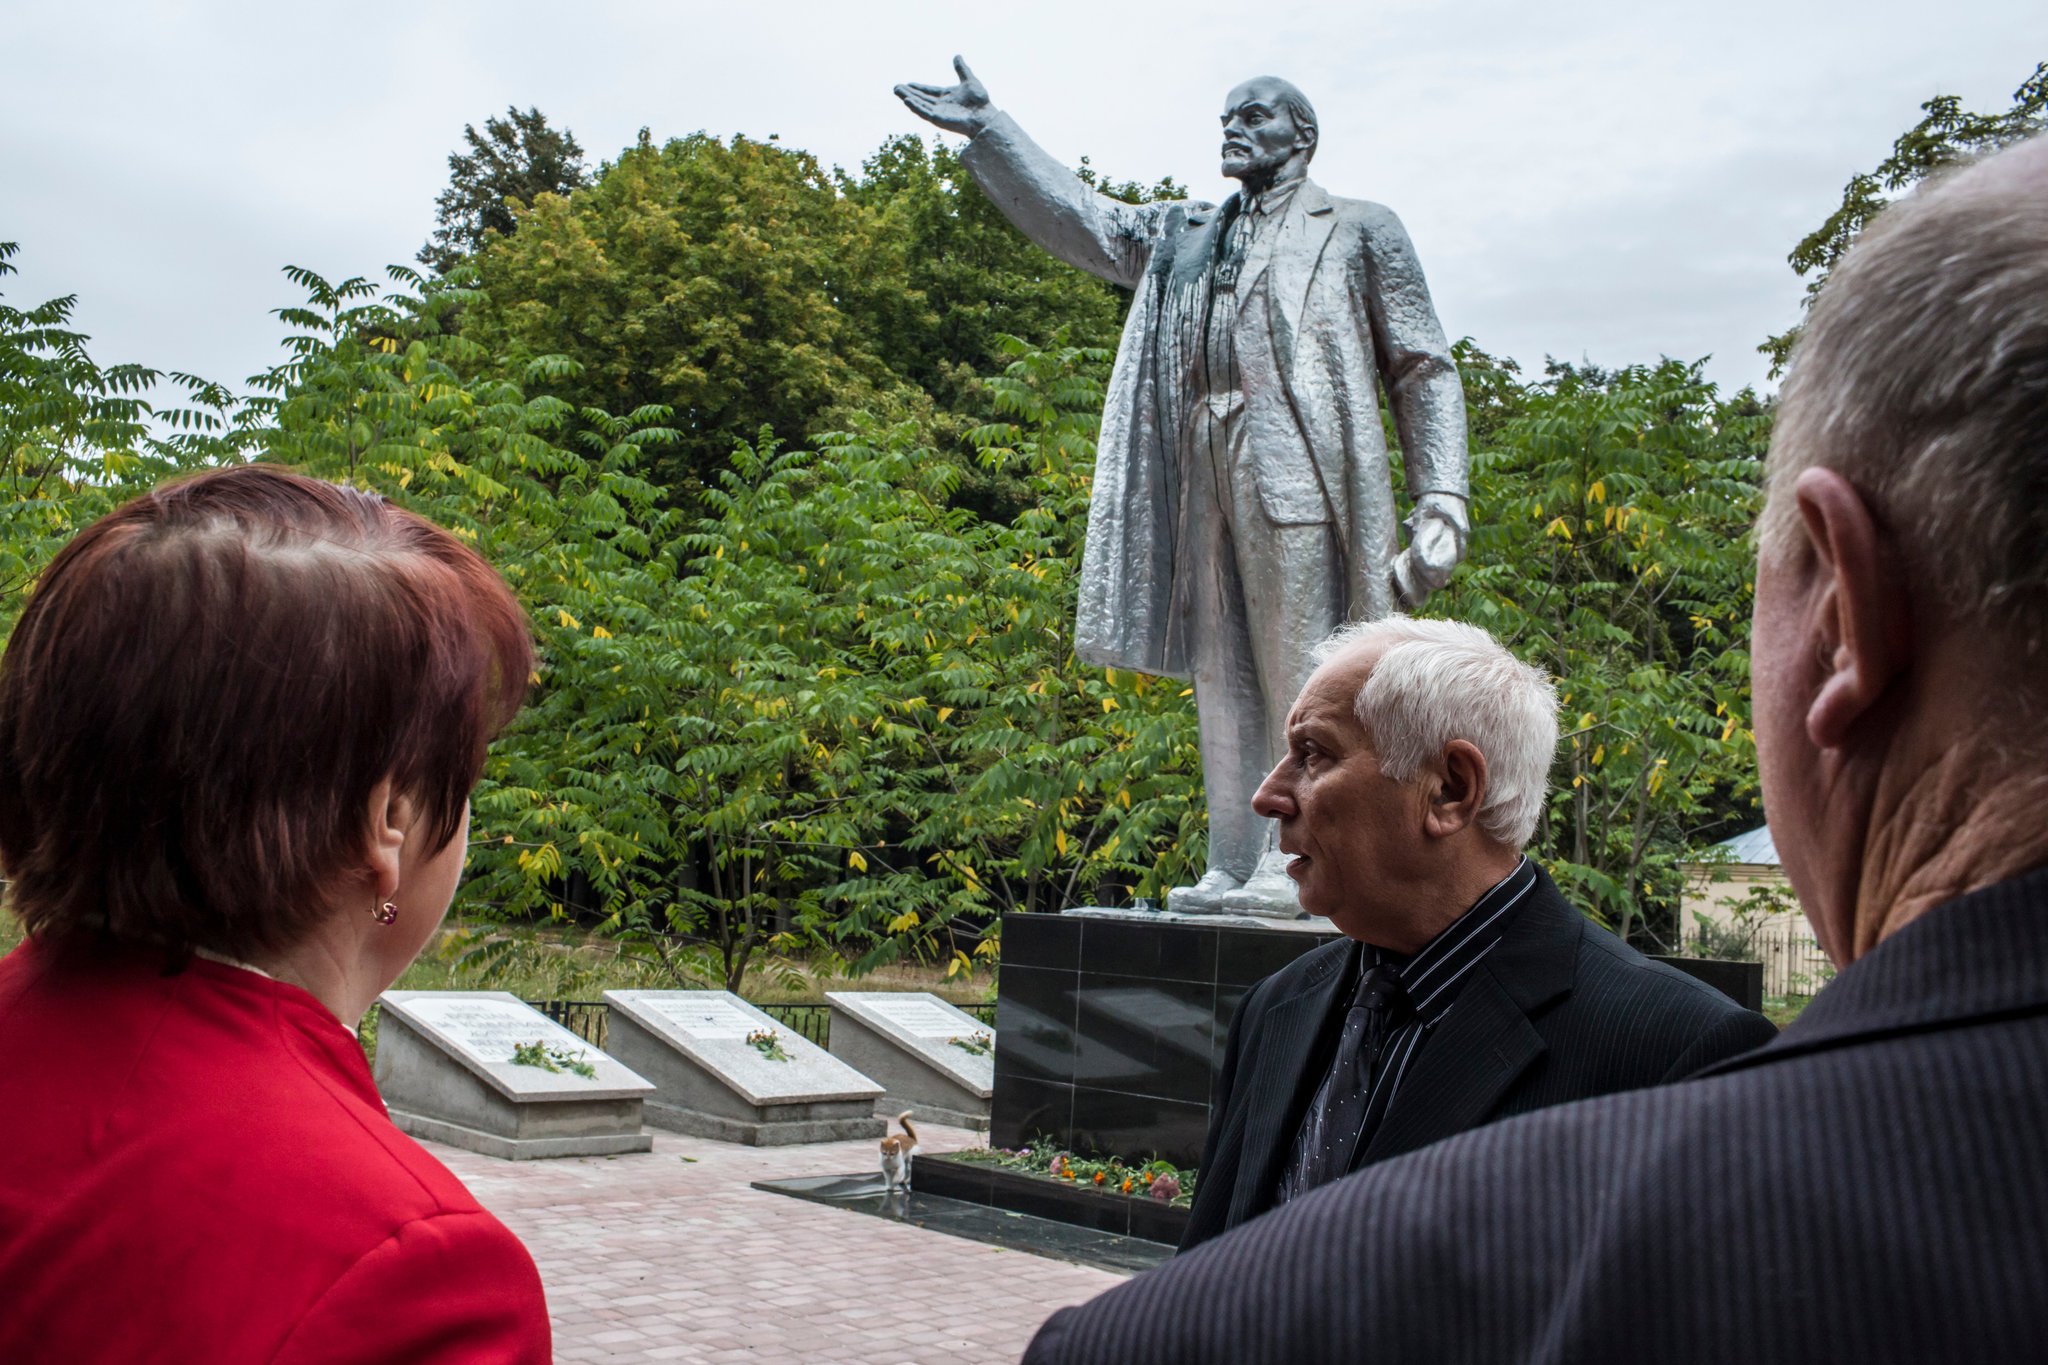  Ivan Papchenko, center, and the Lenin statue moved from town square to a remote spot in a park in Semyonovka, Ukraine. Credit Brendan Hoffman for The New York Times 